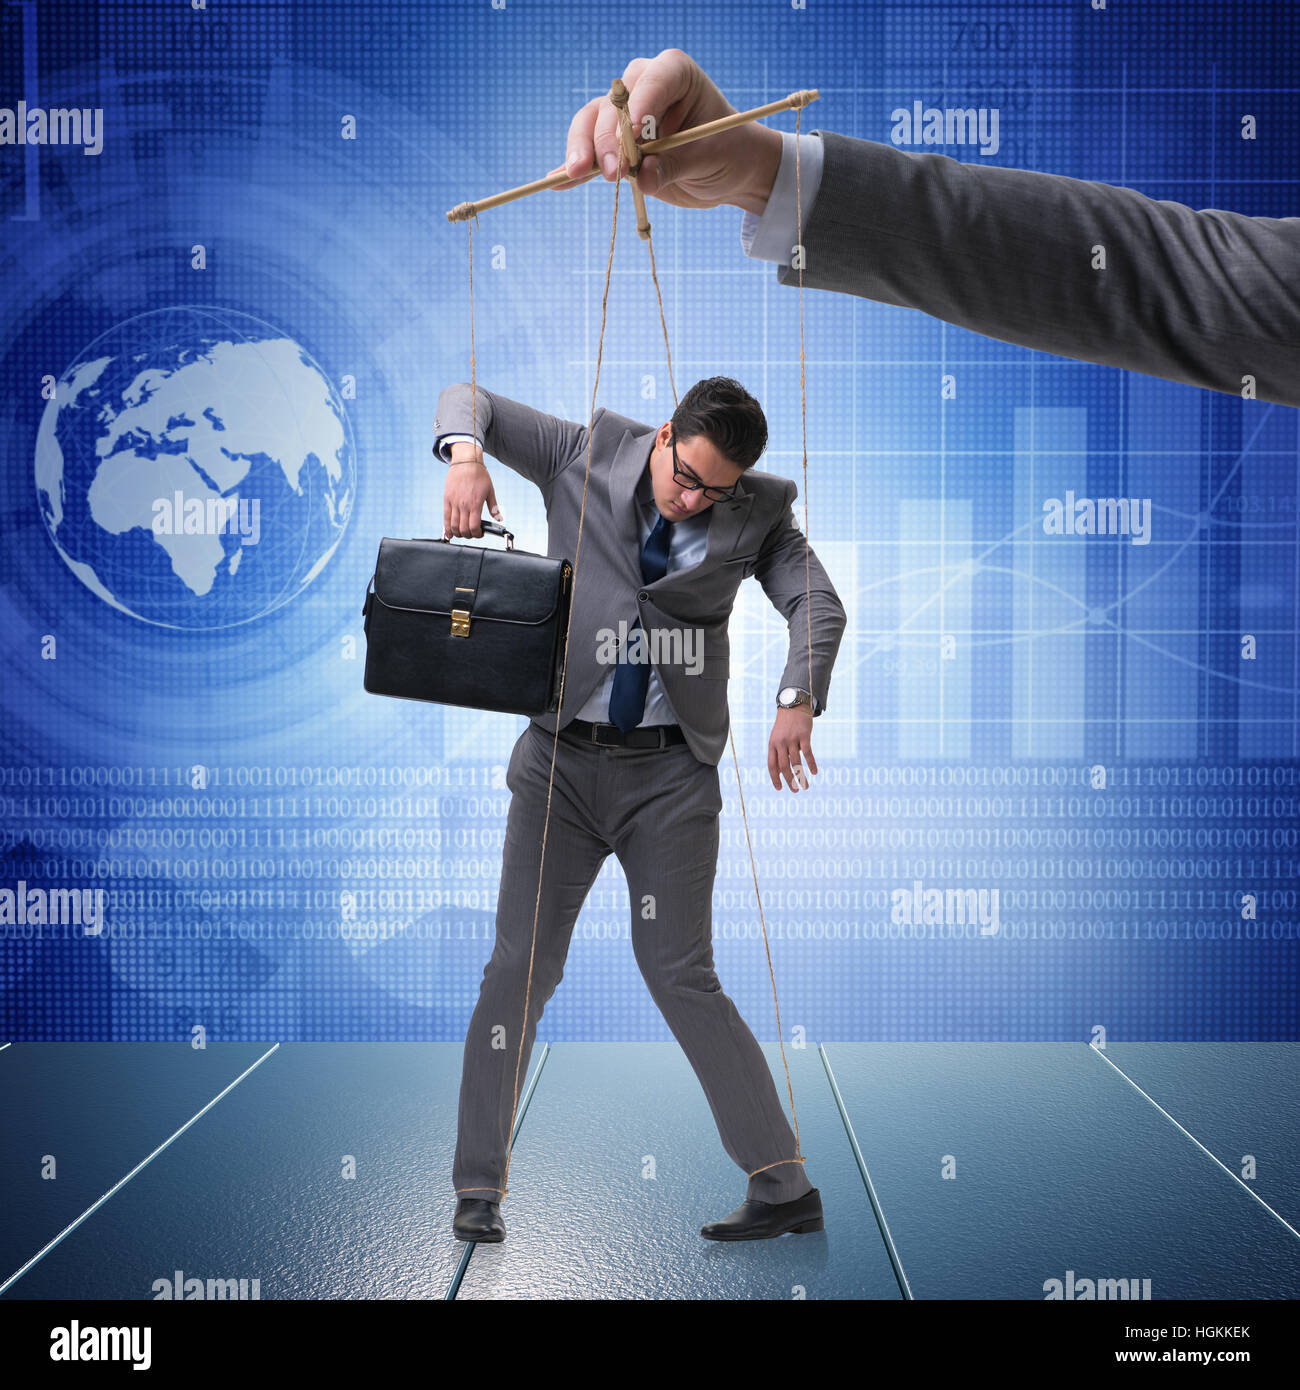 Puppeteer and Puppet Business Stock Photo - Image of domination, male:  39396652